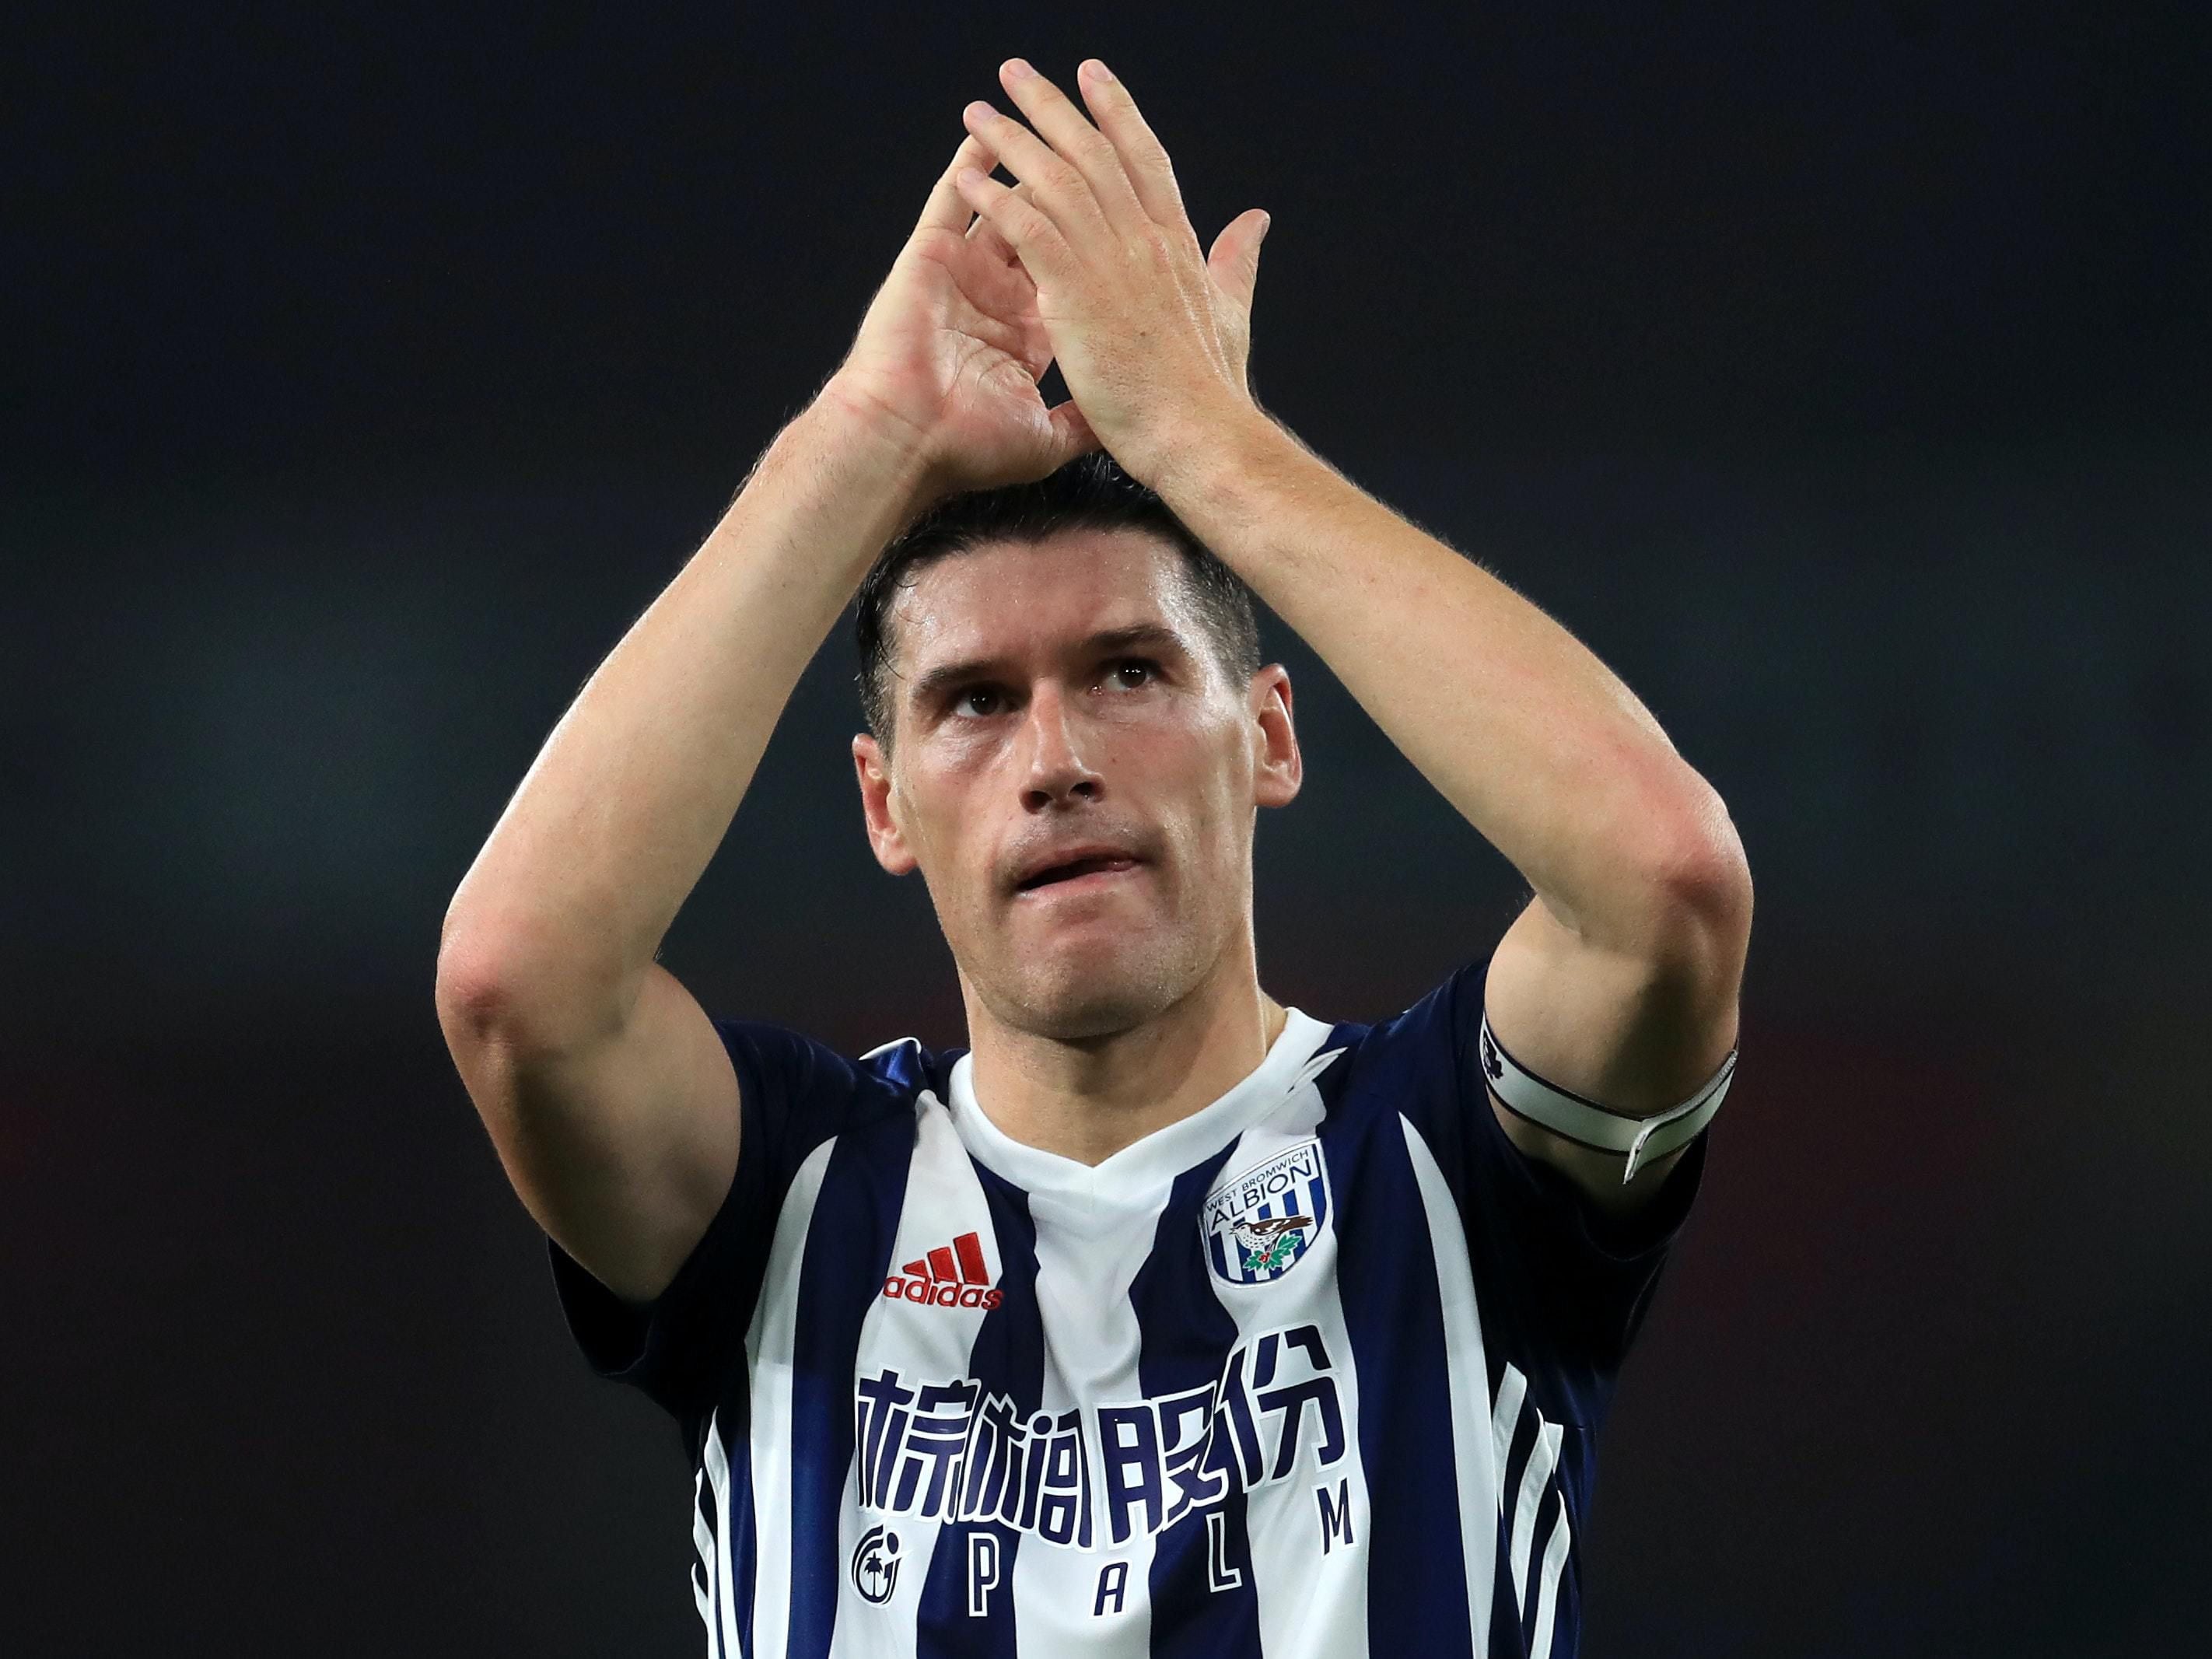 Former West Brom and Aston Villa midfielder Gareth Barry comes out of retirement